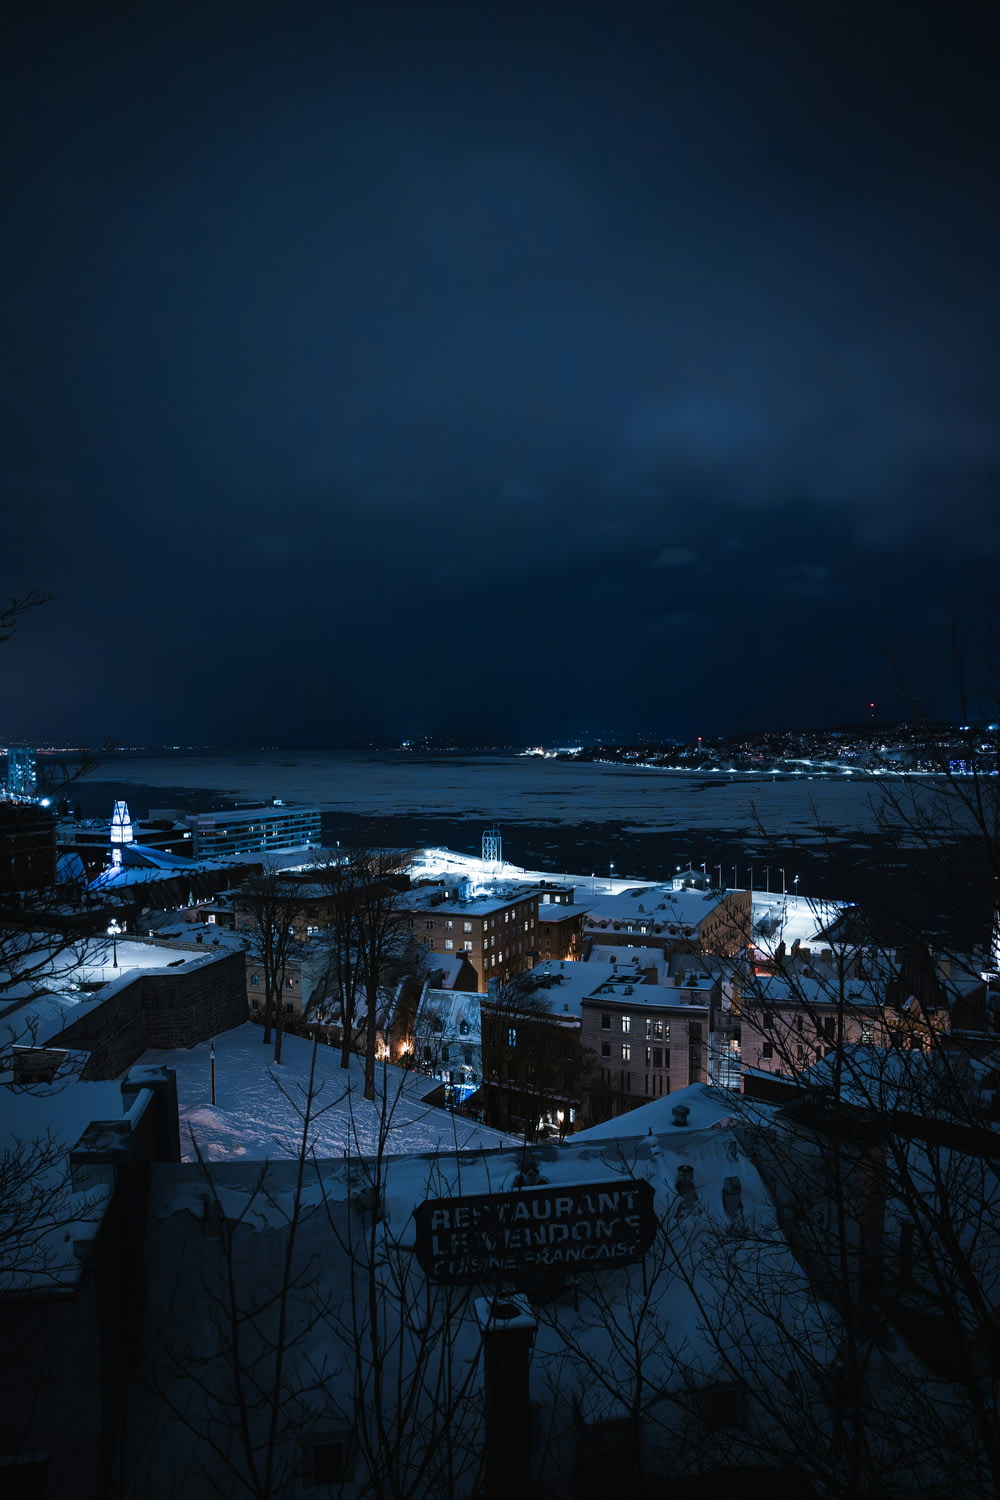 a night view of a city with snow on the ground